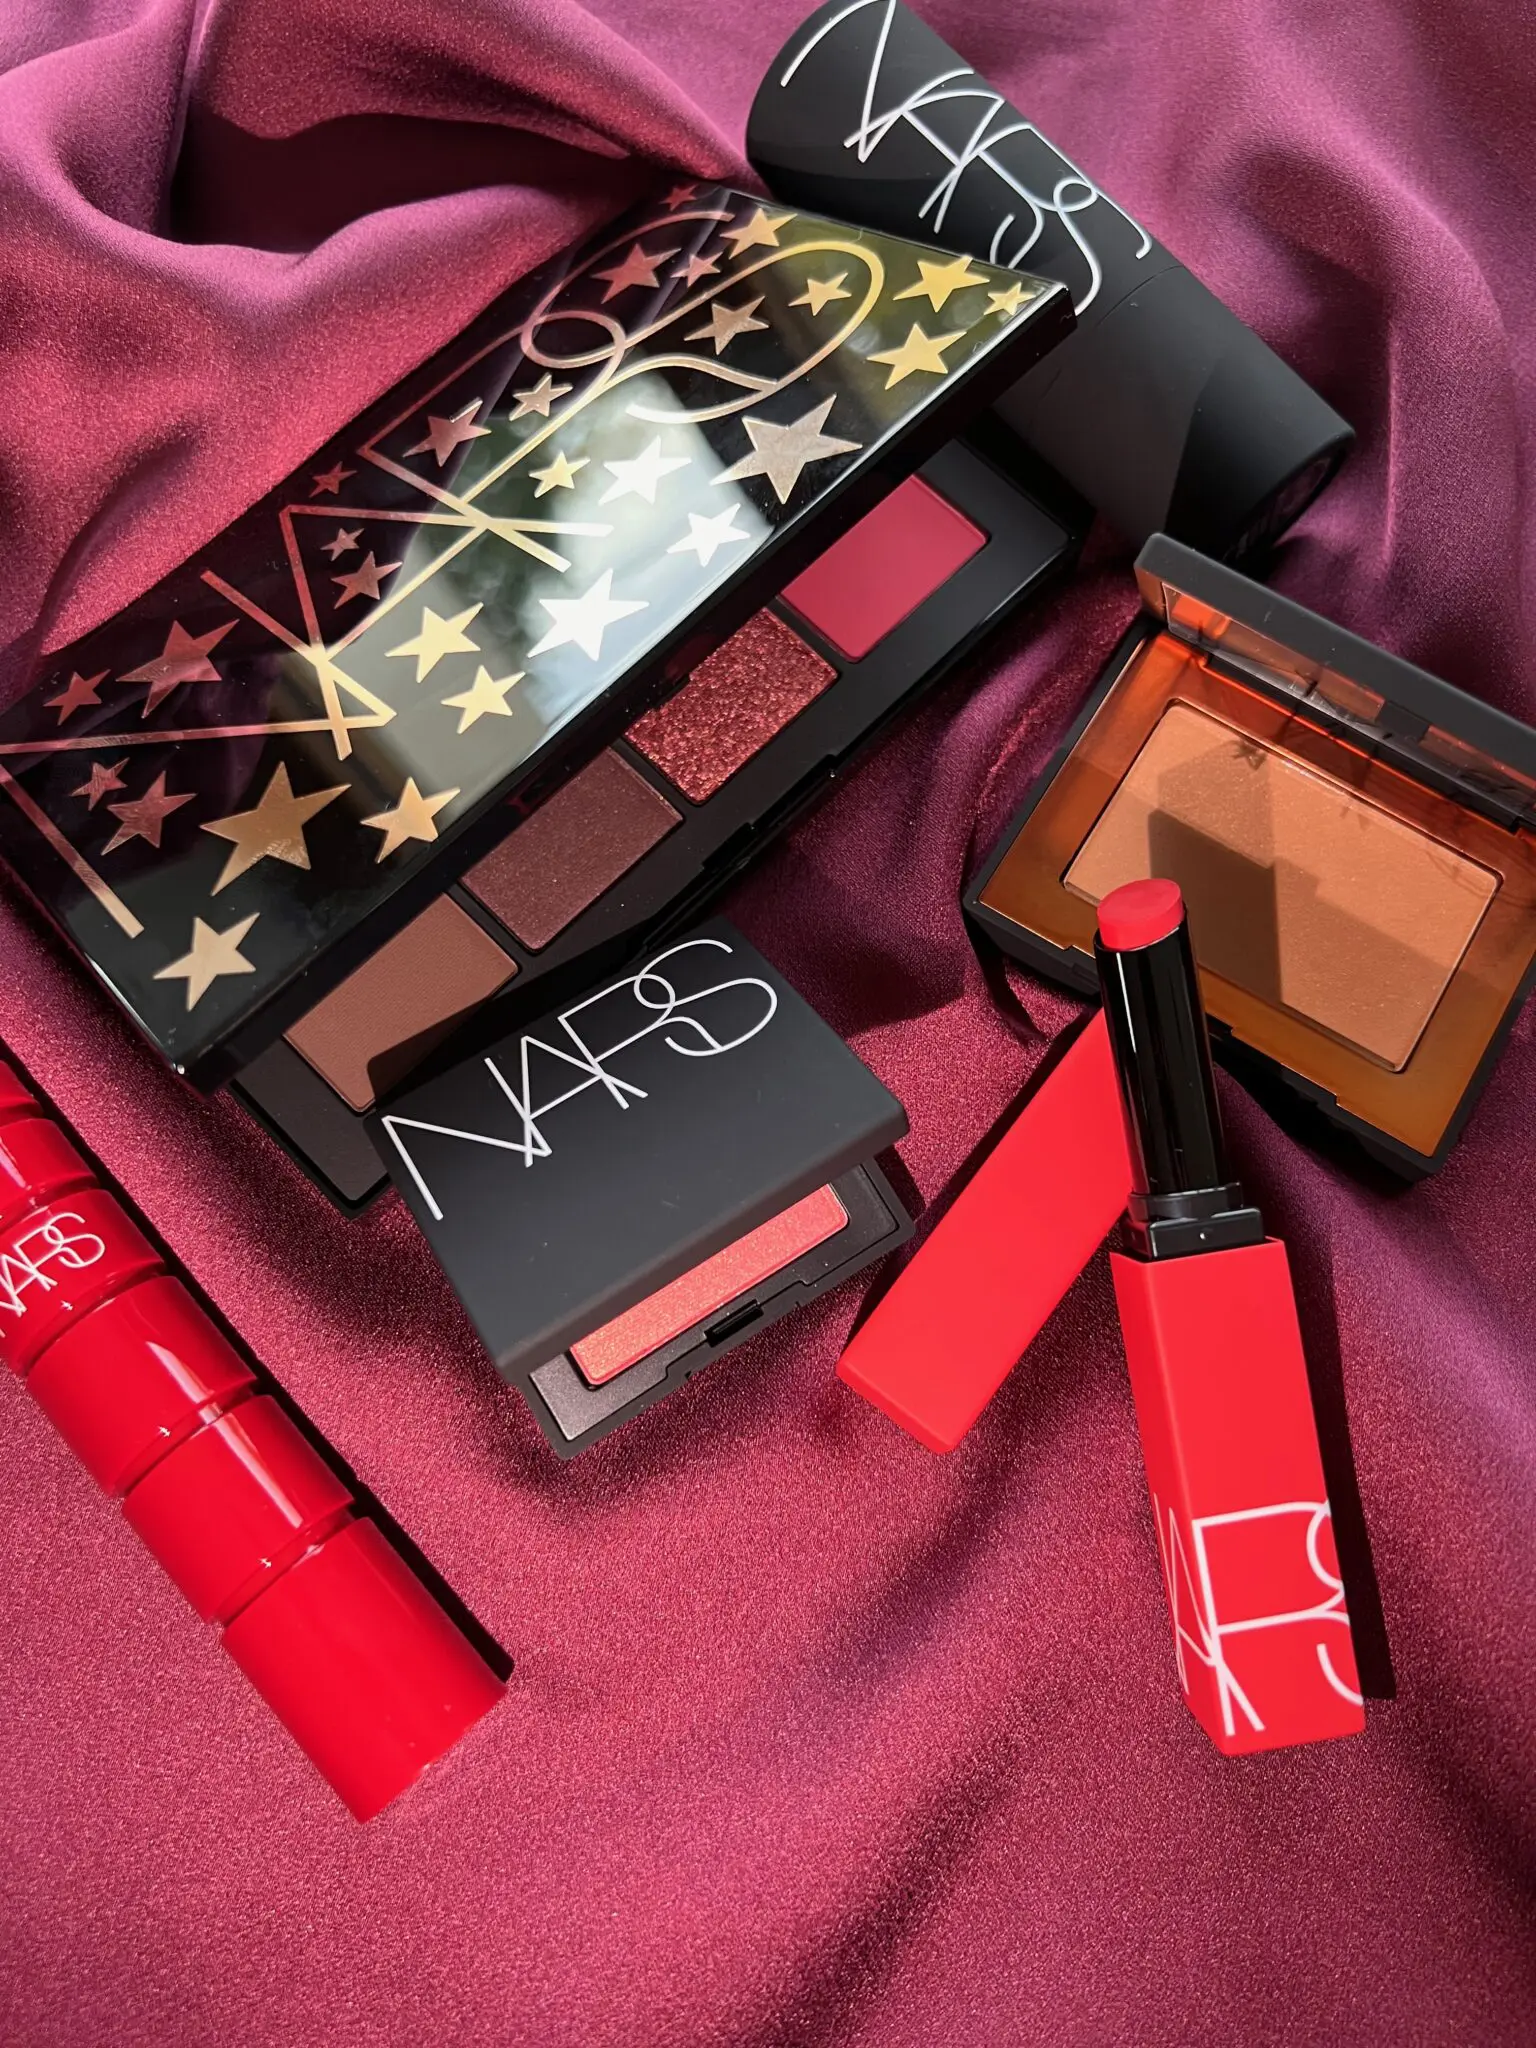 Christmas At Sephora - Top Holiday 2022 Gift Sets For Women. Nars, Sephora,  Benefit And More.